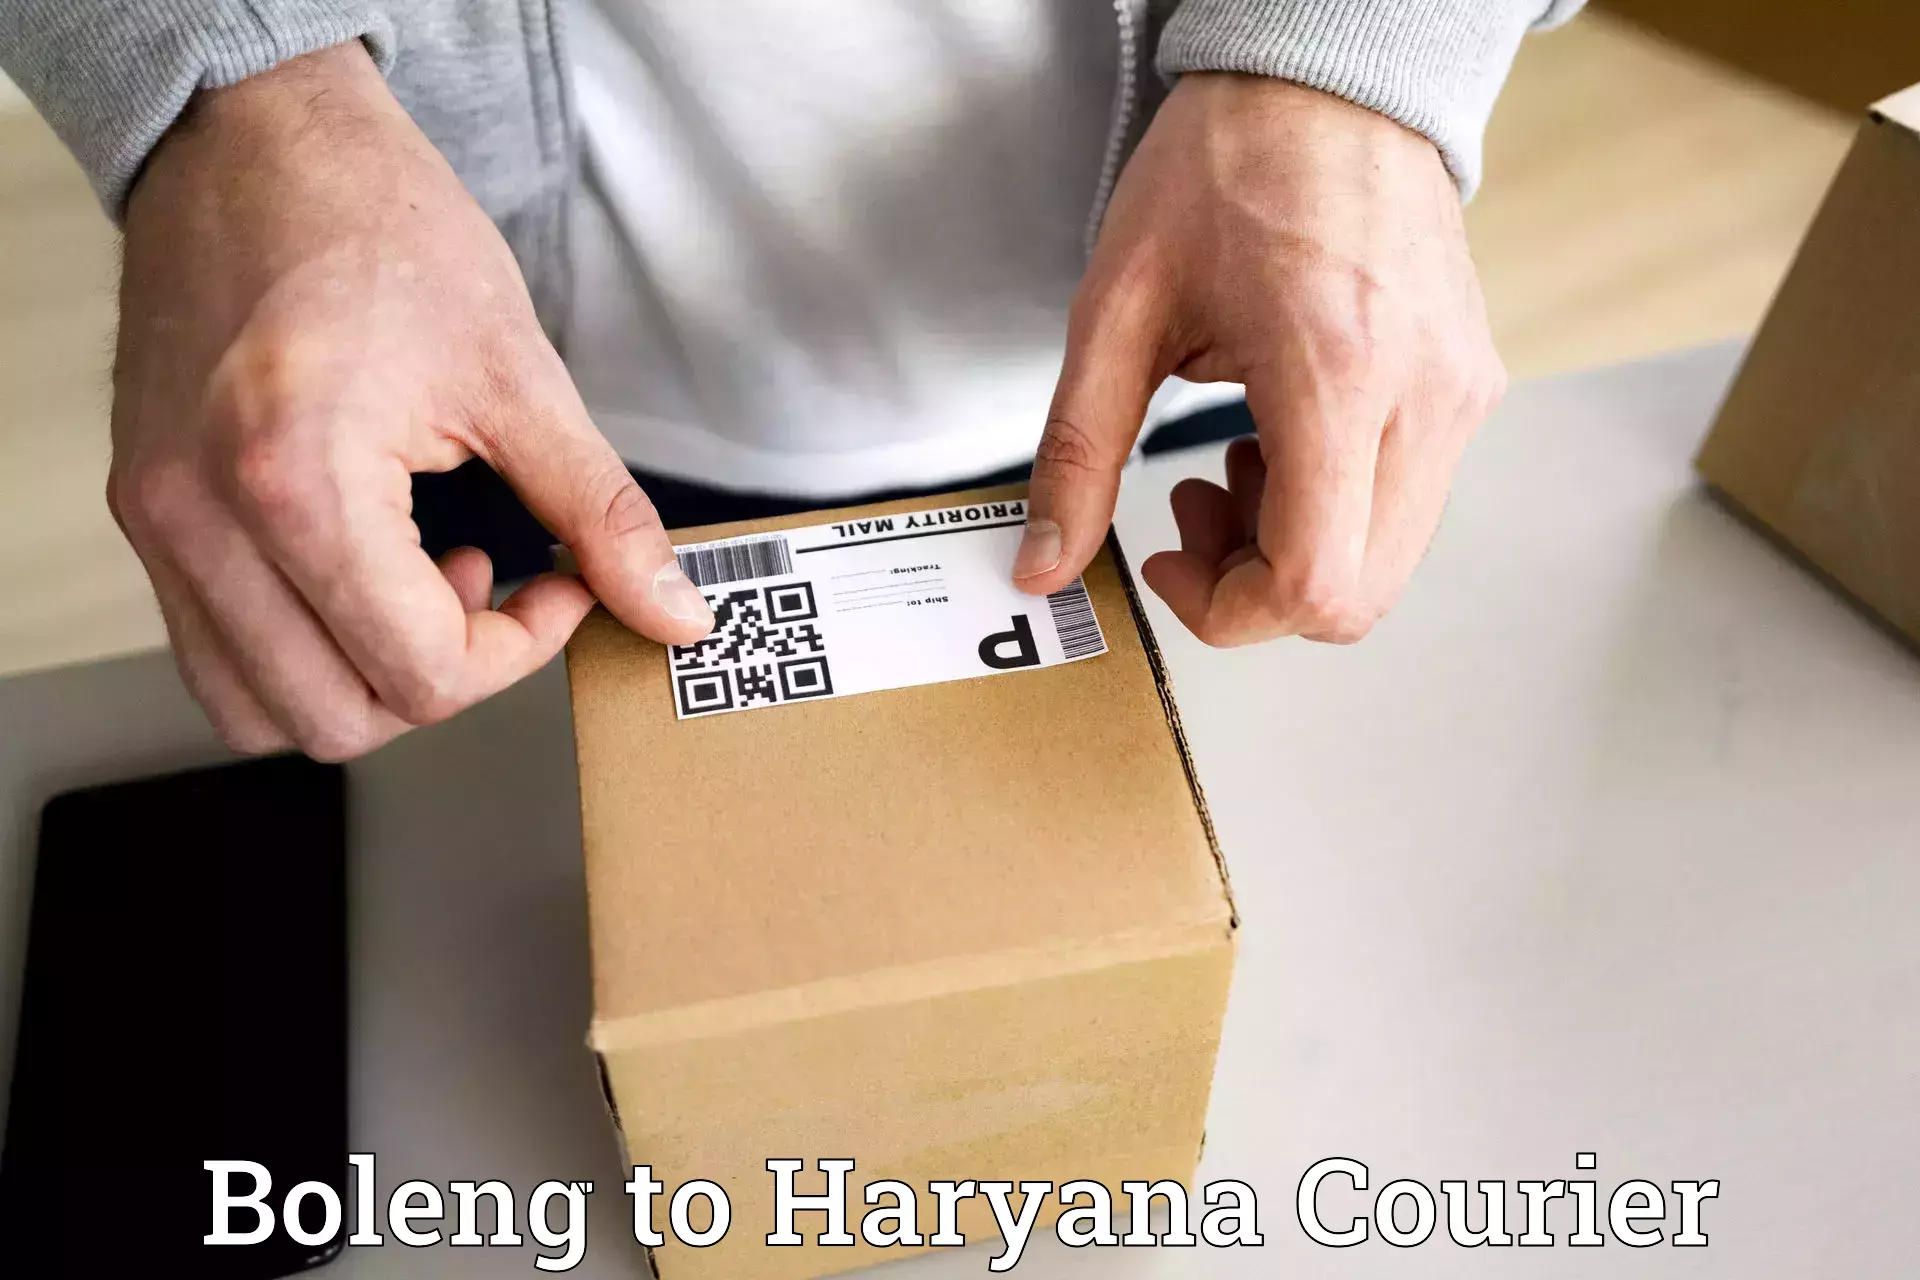 Express delivery network Boleng to Hansi